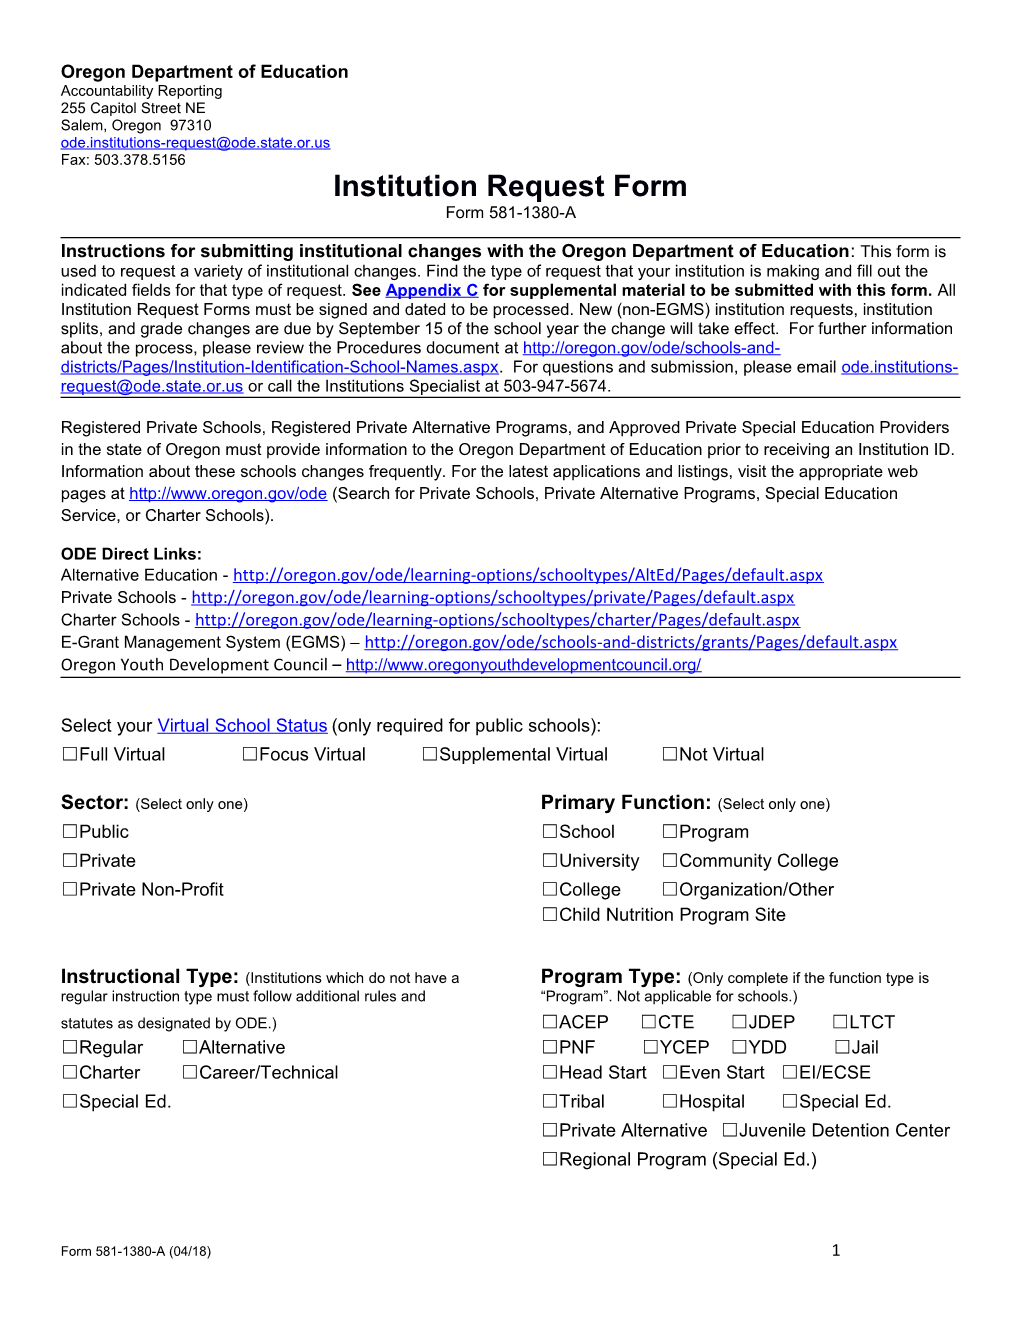 Institution Request Form 581-1380-A